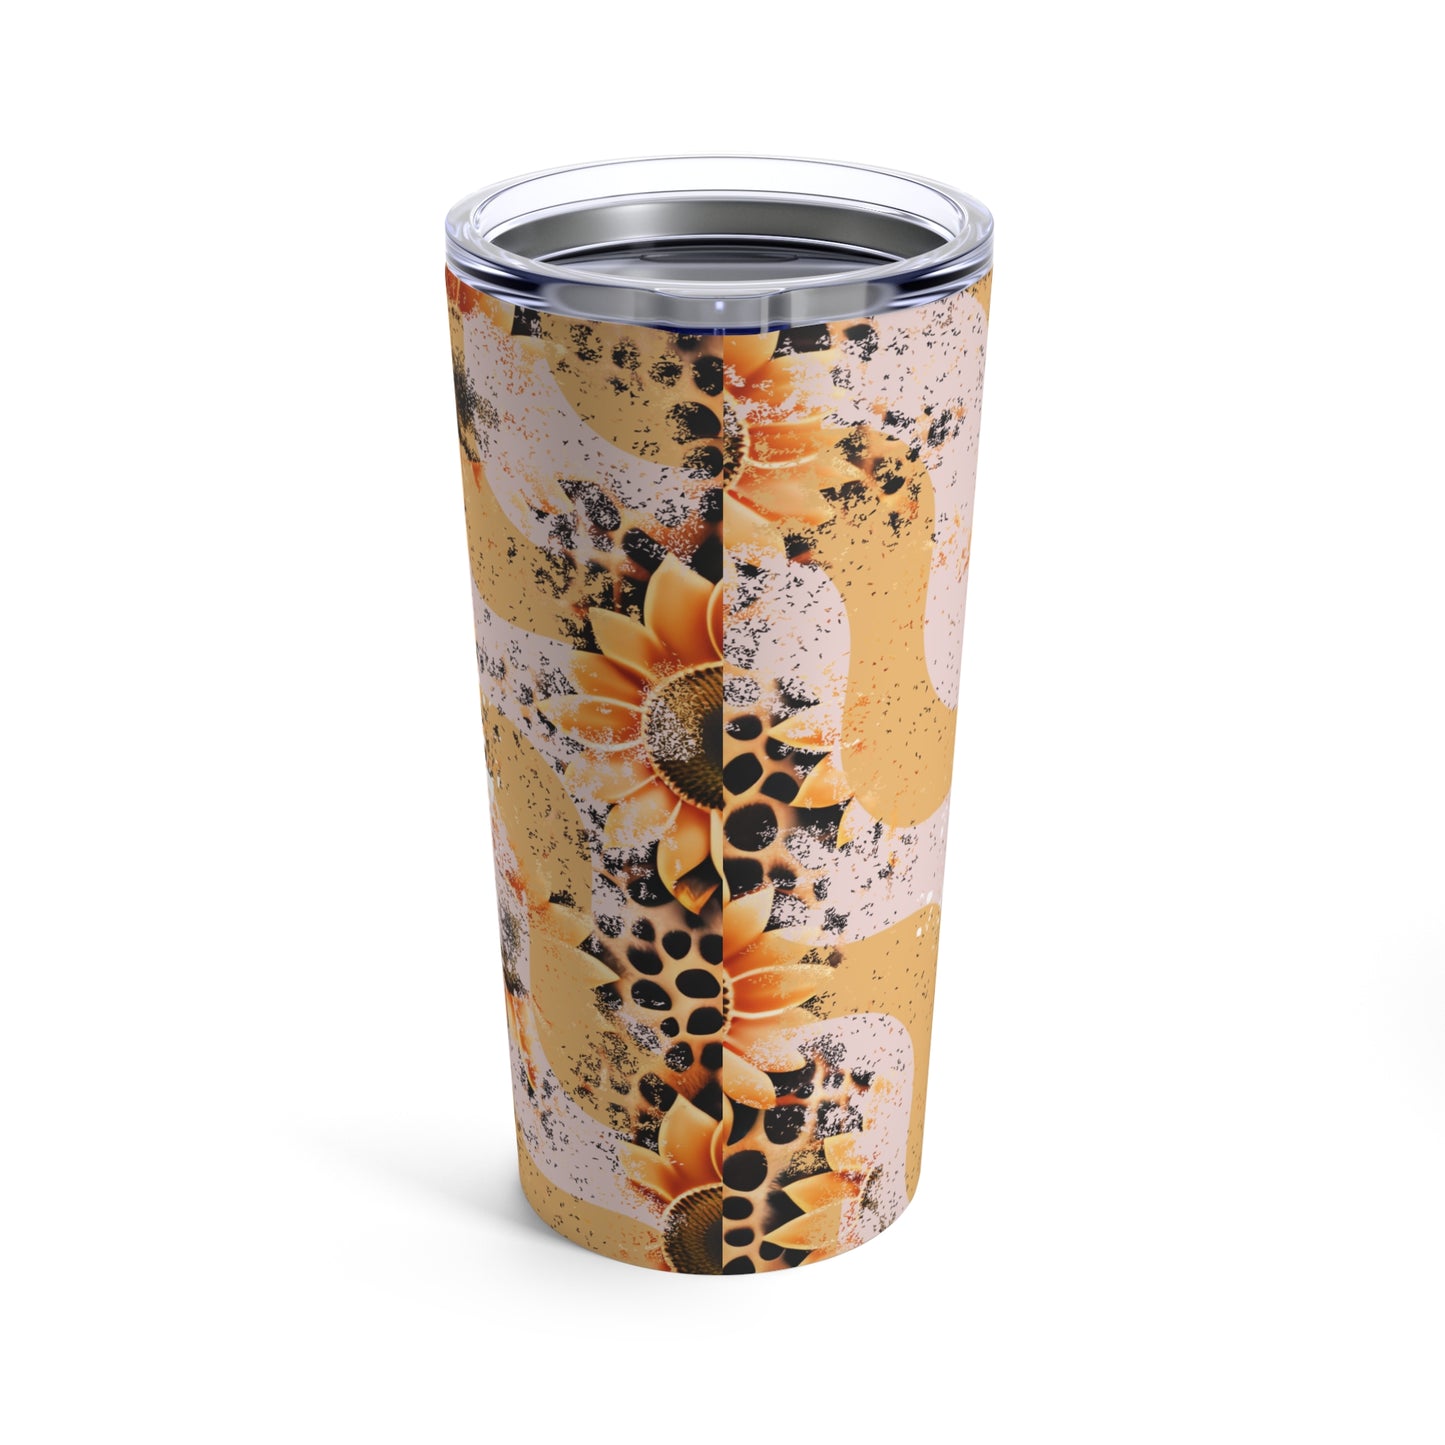 Won't Die without Coffee Skinny Steel Tumbler with Straw, 20oz